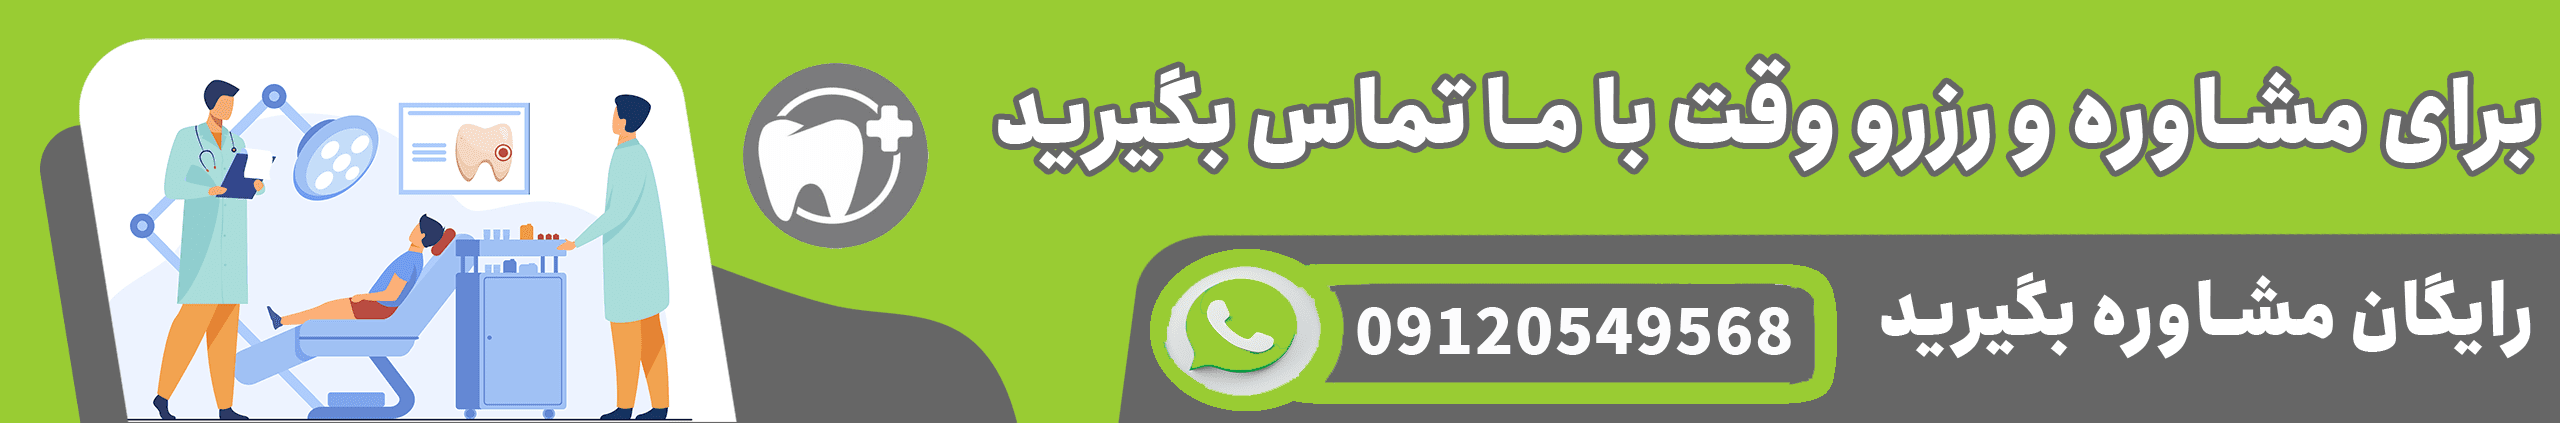 call to action پیوند لثه